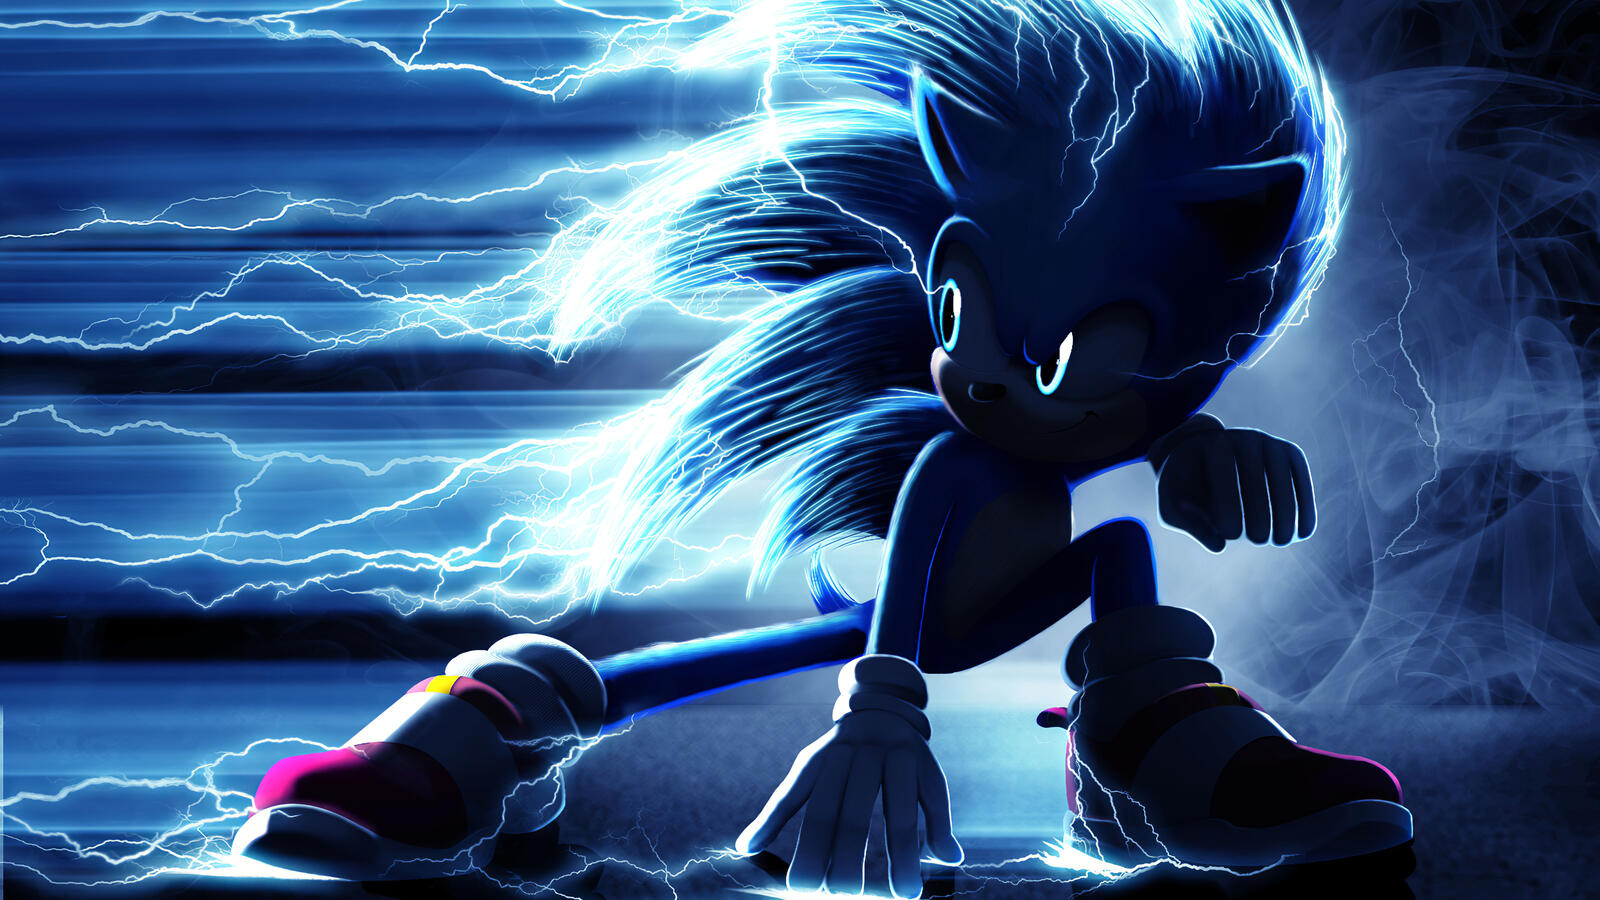 Wallpapers movies Sonic The Hedgehog 2020 Movies on the desktop